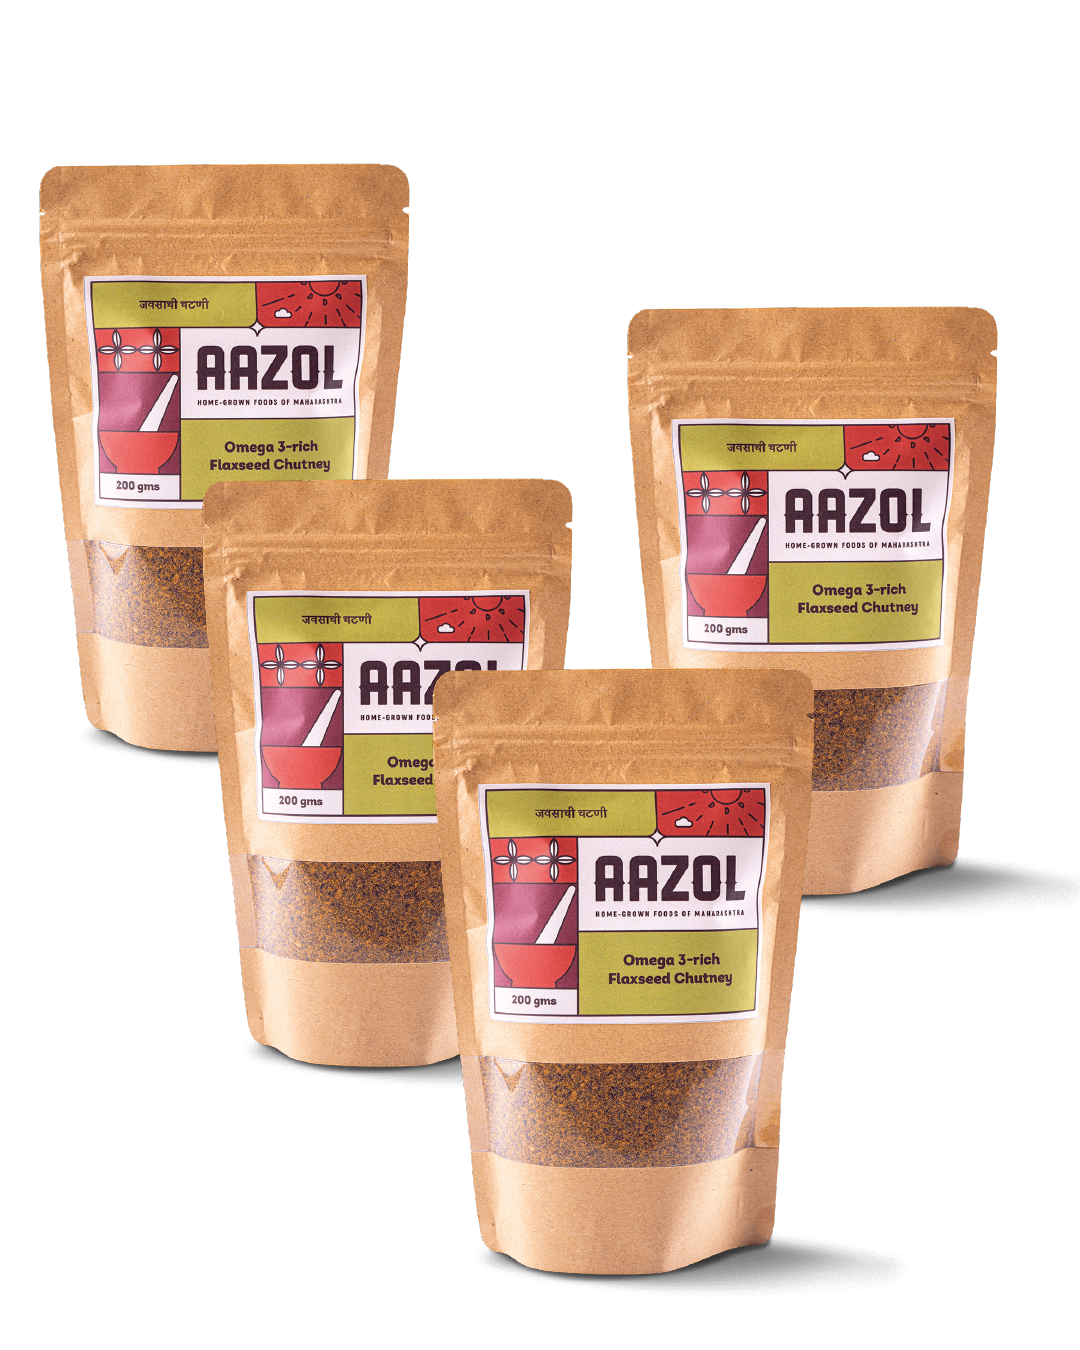 Aazol Omega 3-rich Flaxseed Chutney - 800gms (Pack of 4 X 200g)